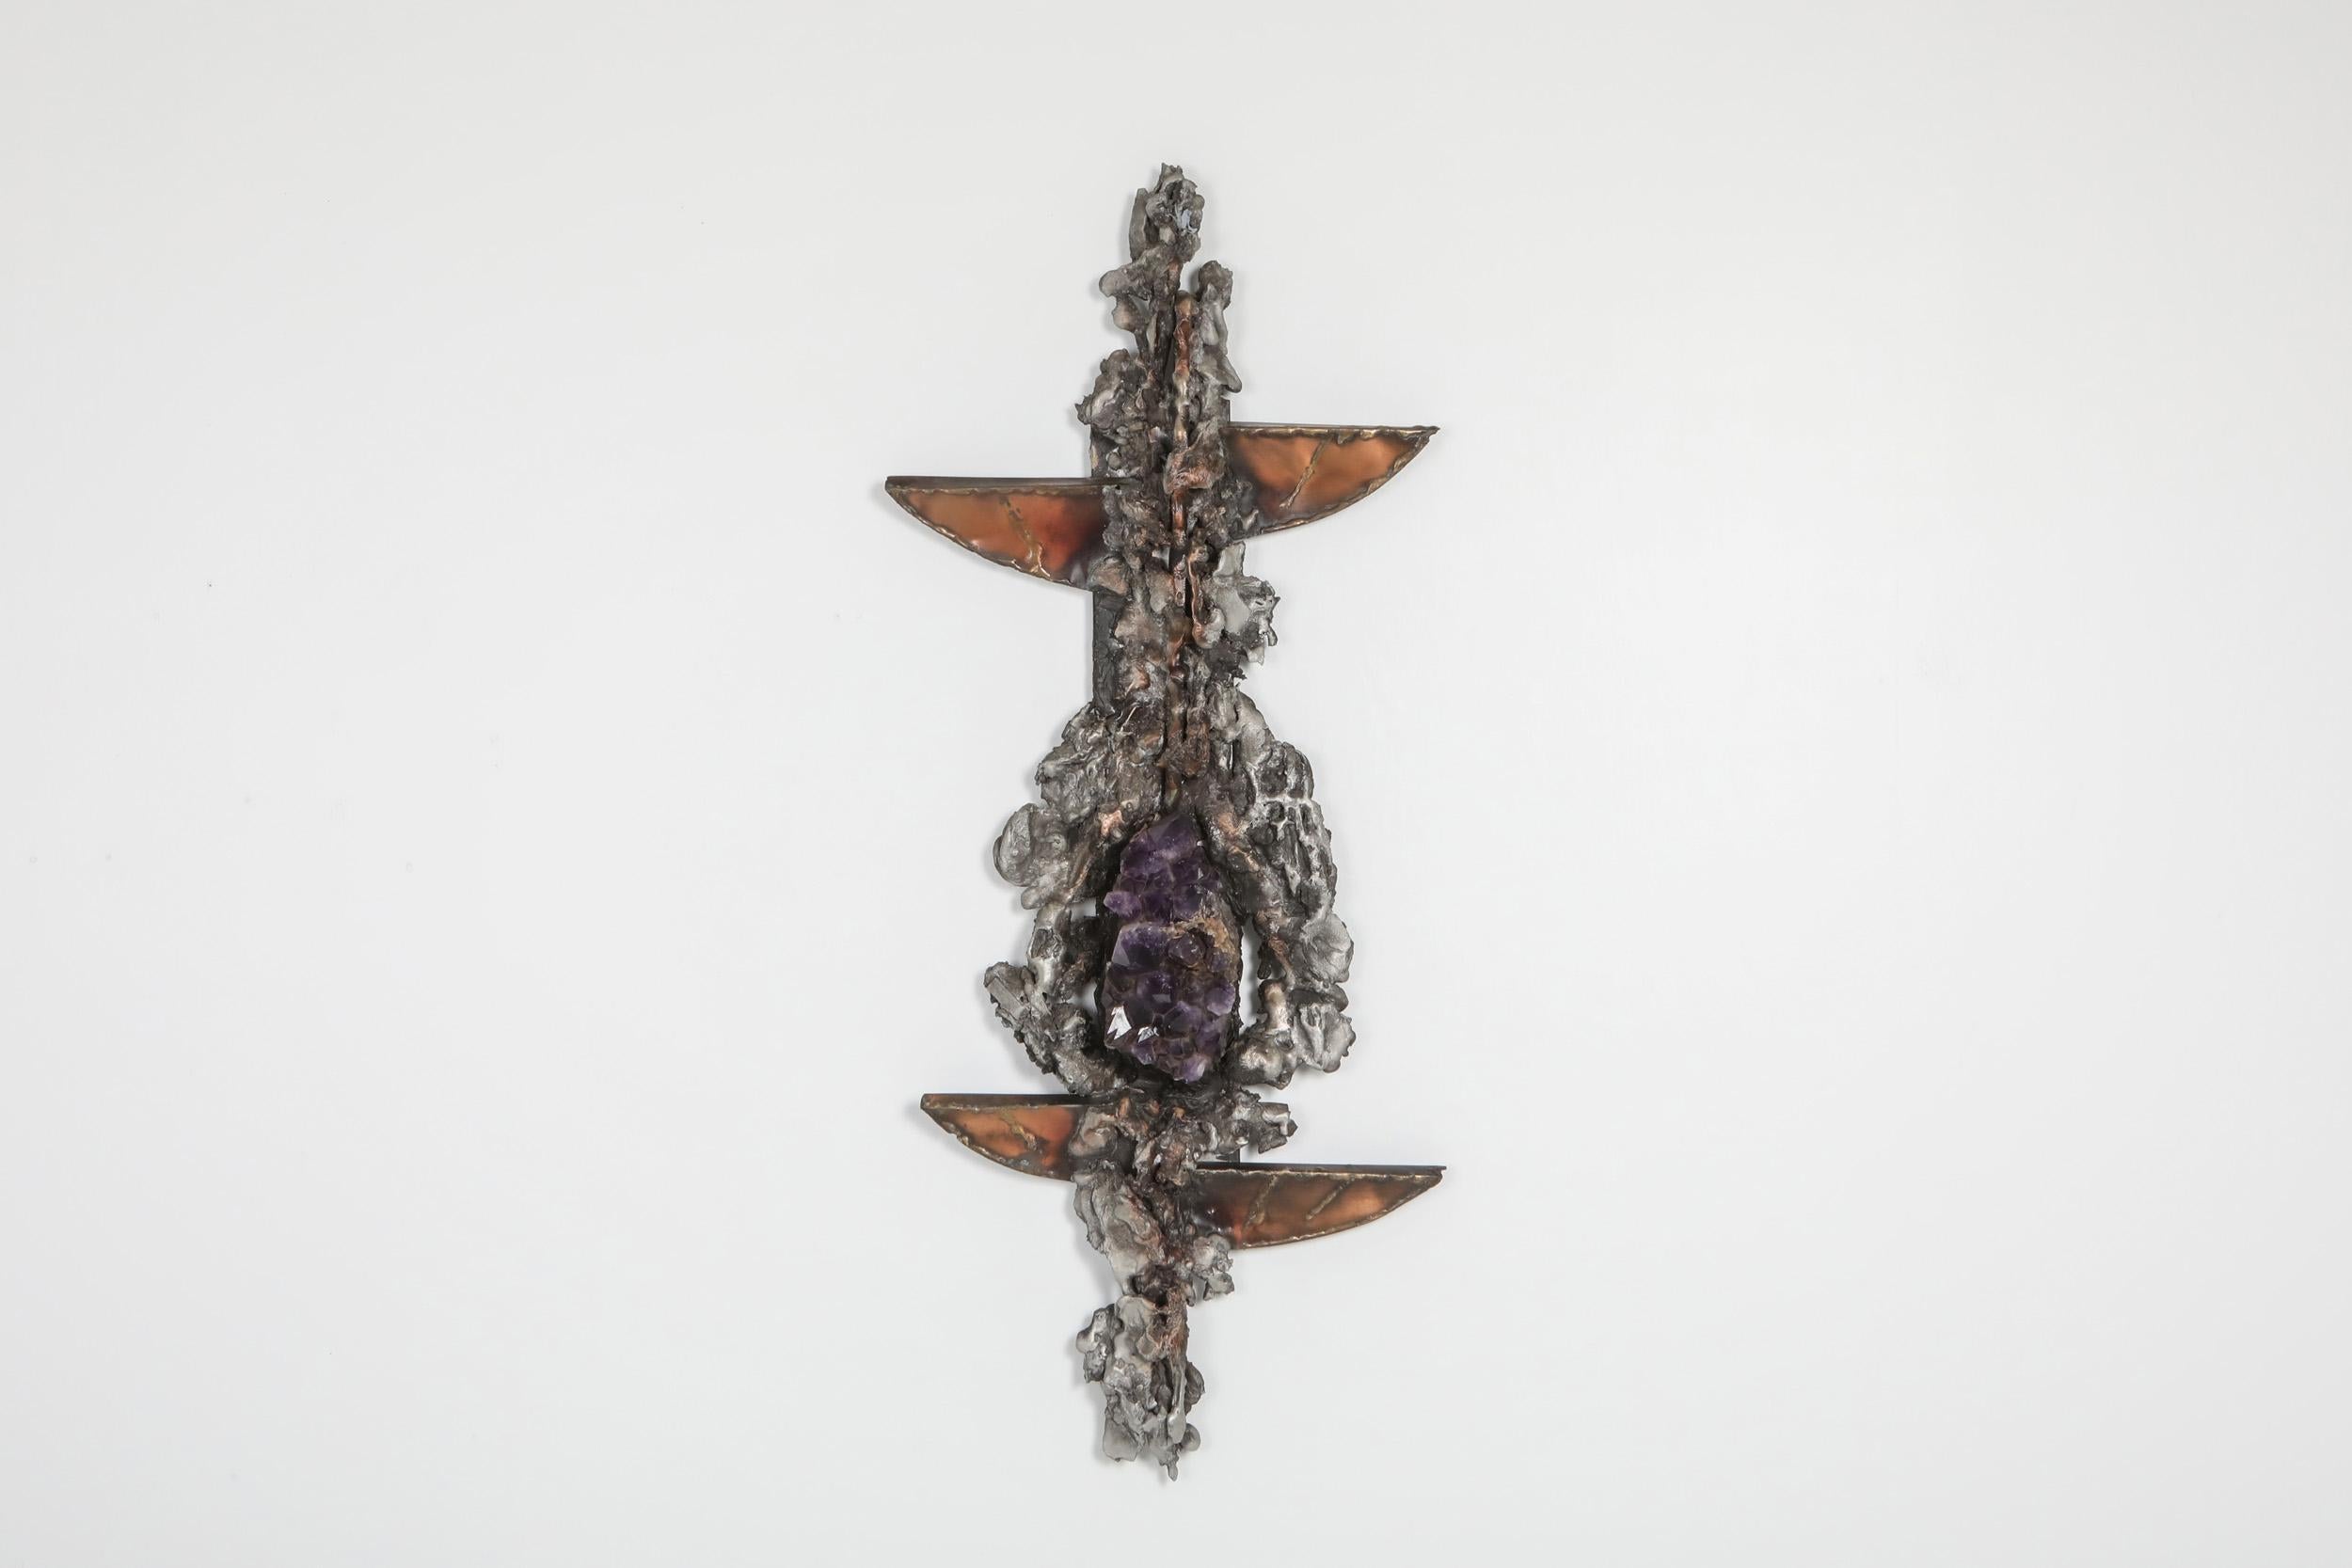 Art sculpture by Marc D’haenens, the 1970s.

The piece shows a variety of organic shapes in metal and copper, and a large piece of Amethyst as centerpiece.
 